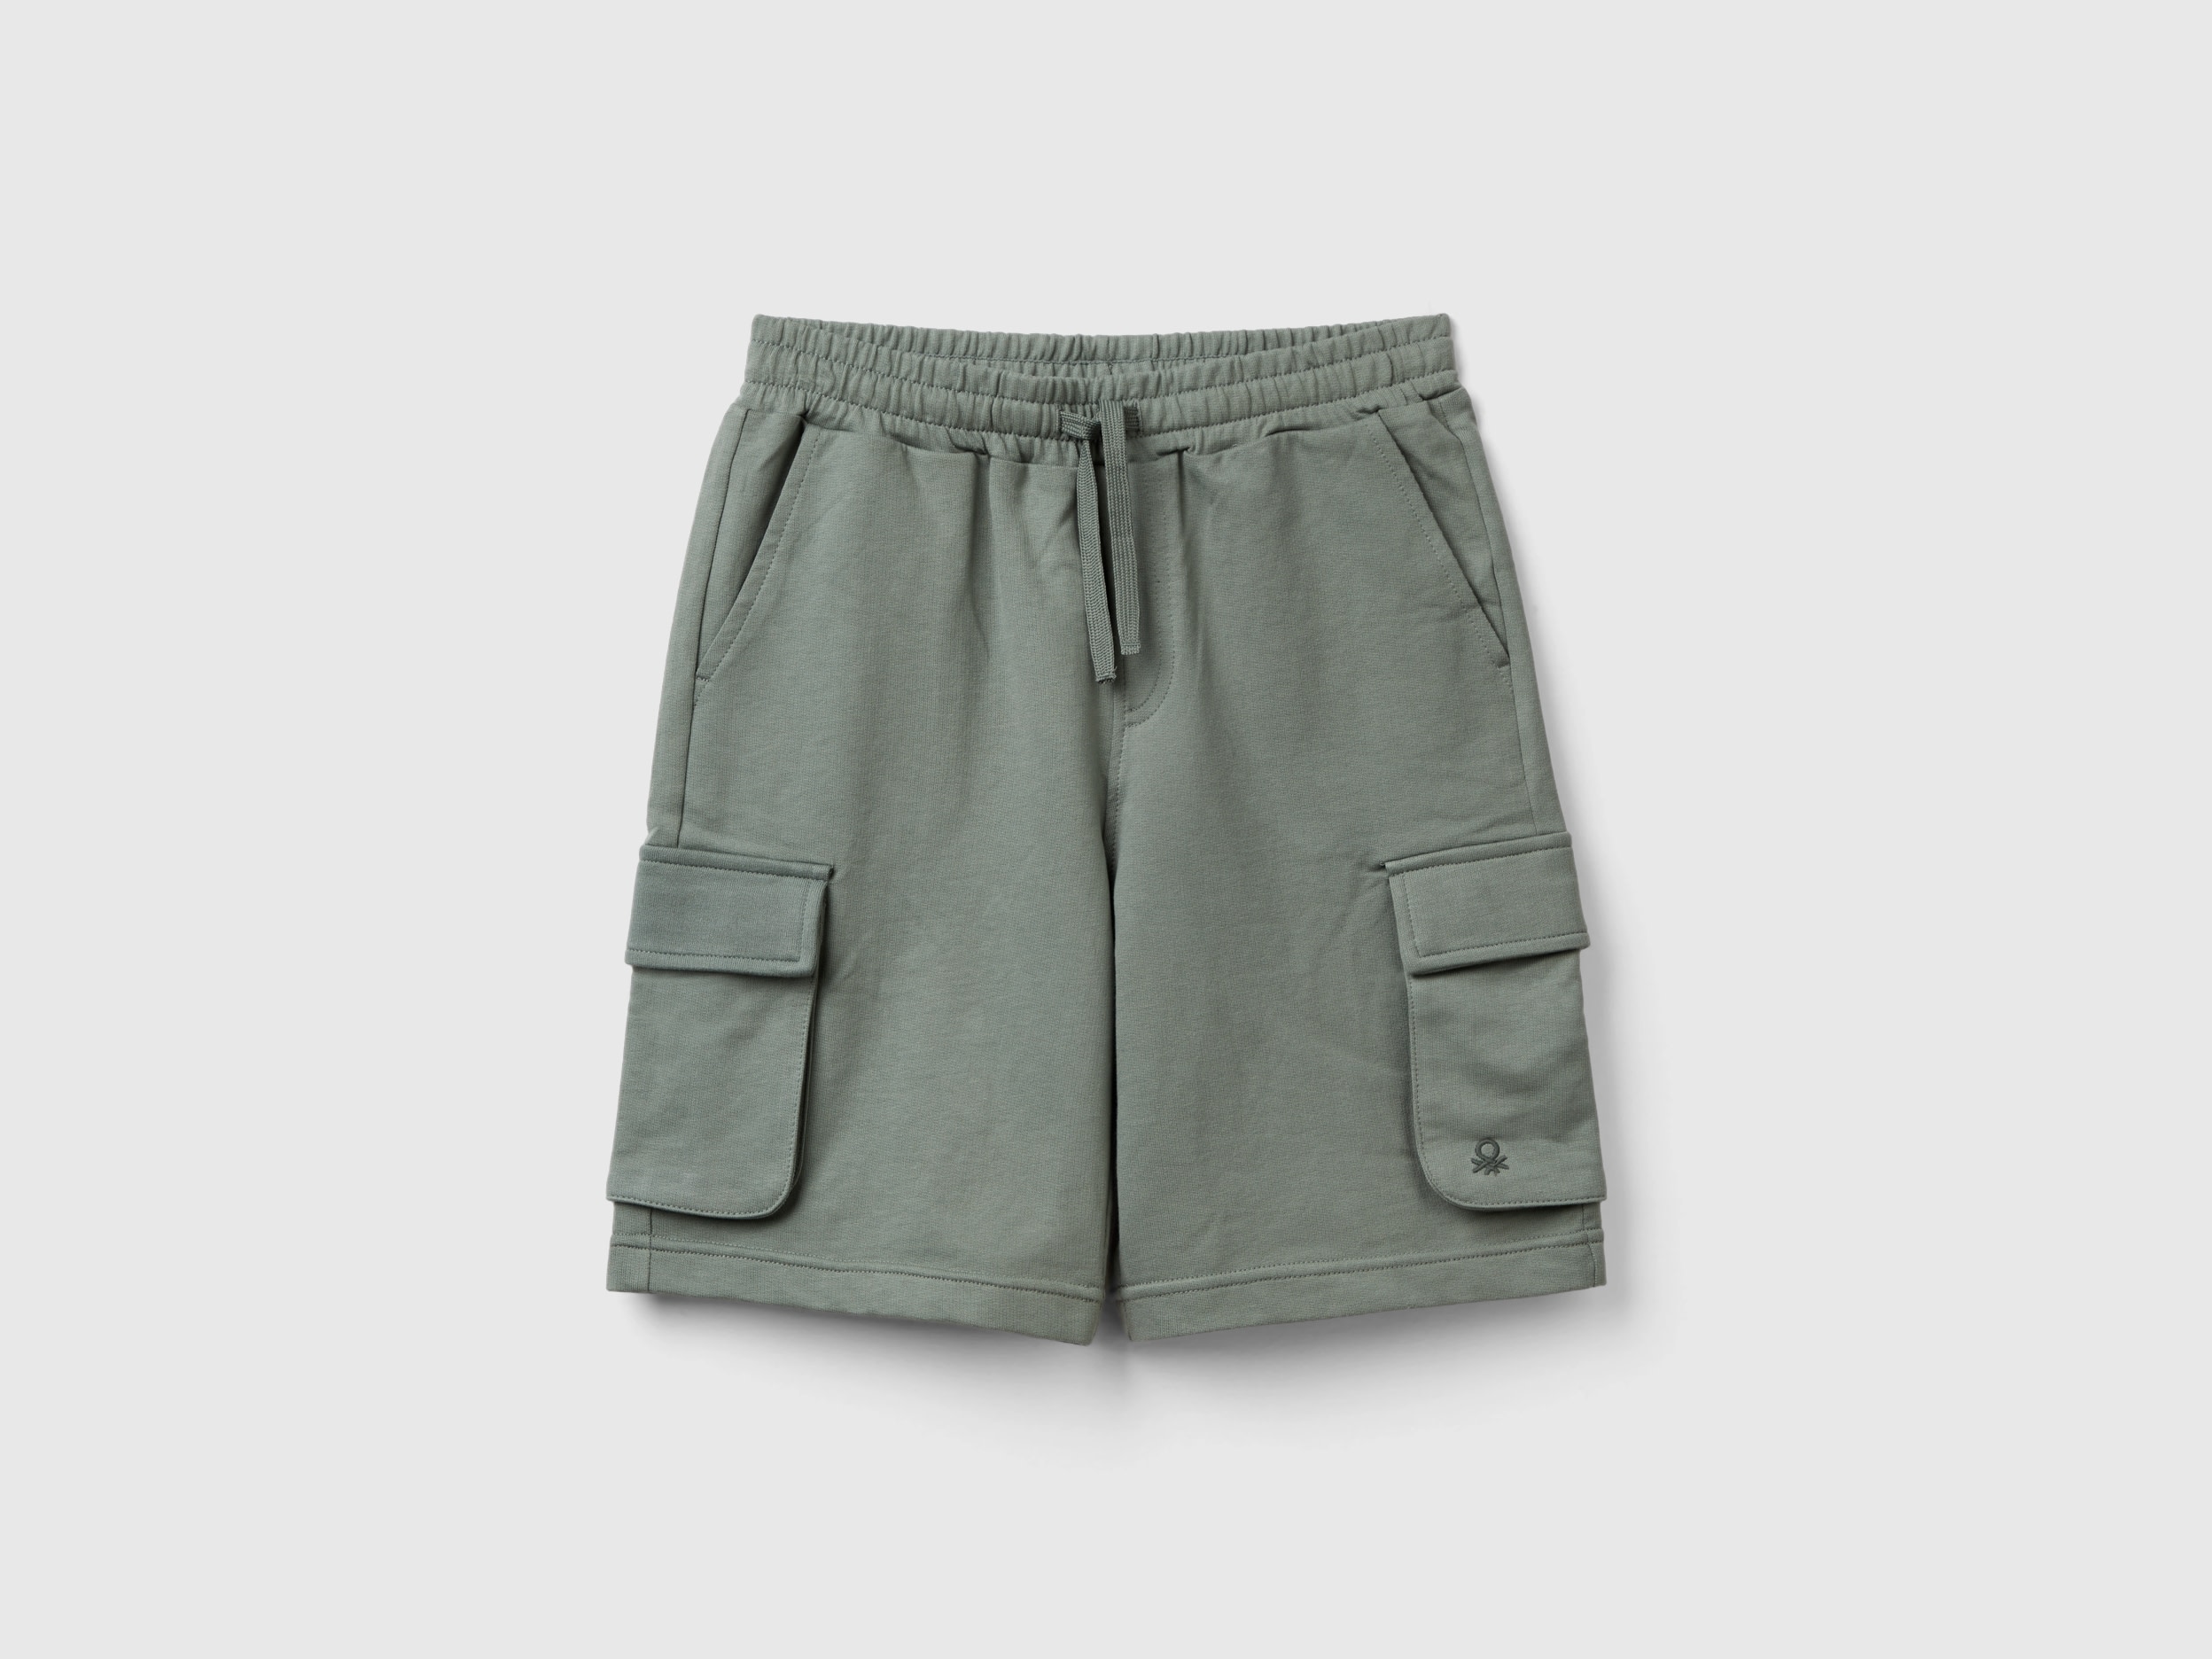 Image of Benetton, Cargo Shorts In Light Sweat Fabric, size XL, Military Green, Kids